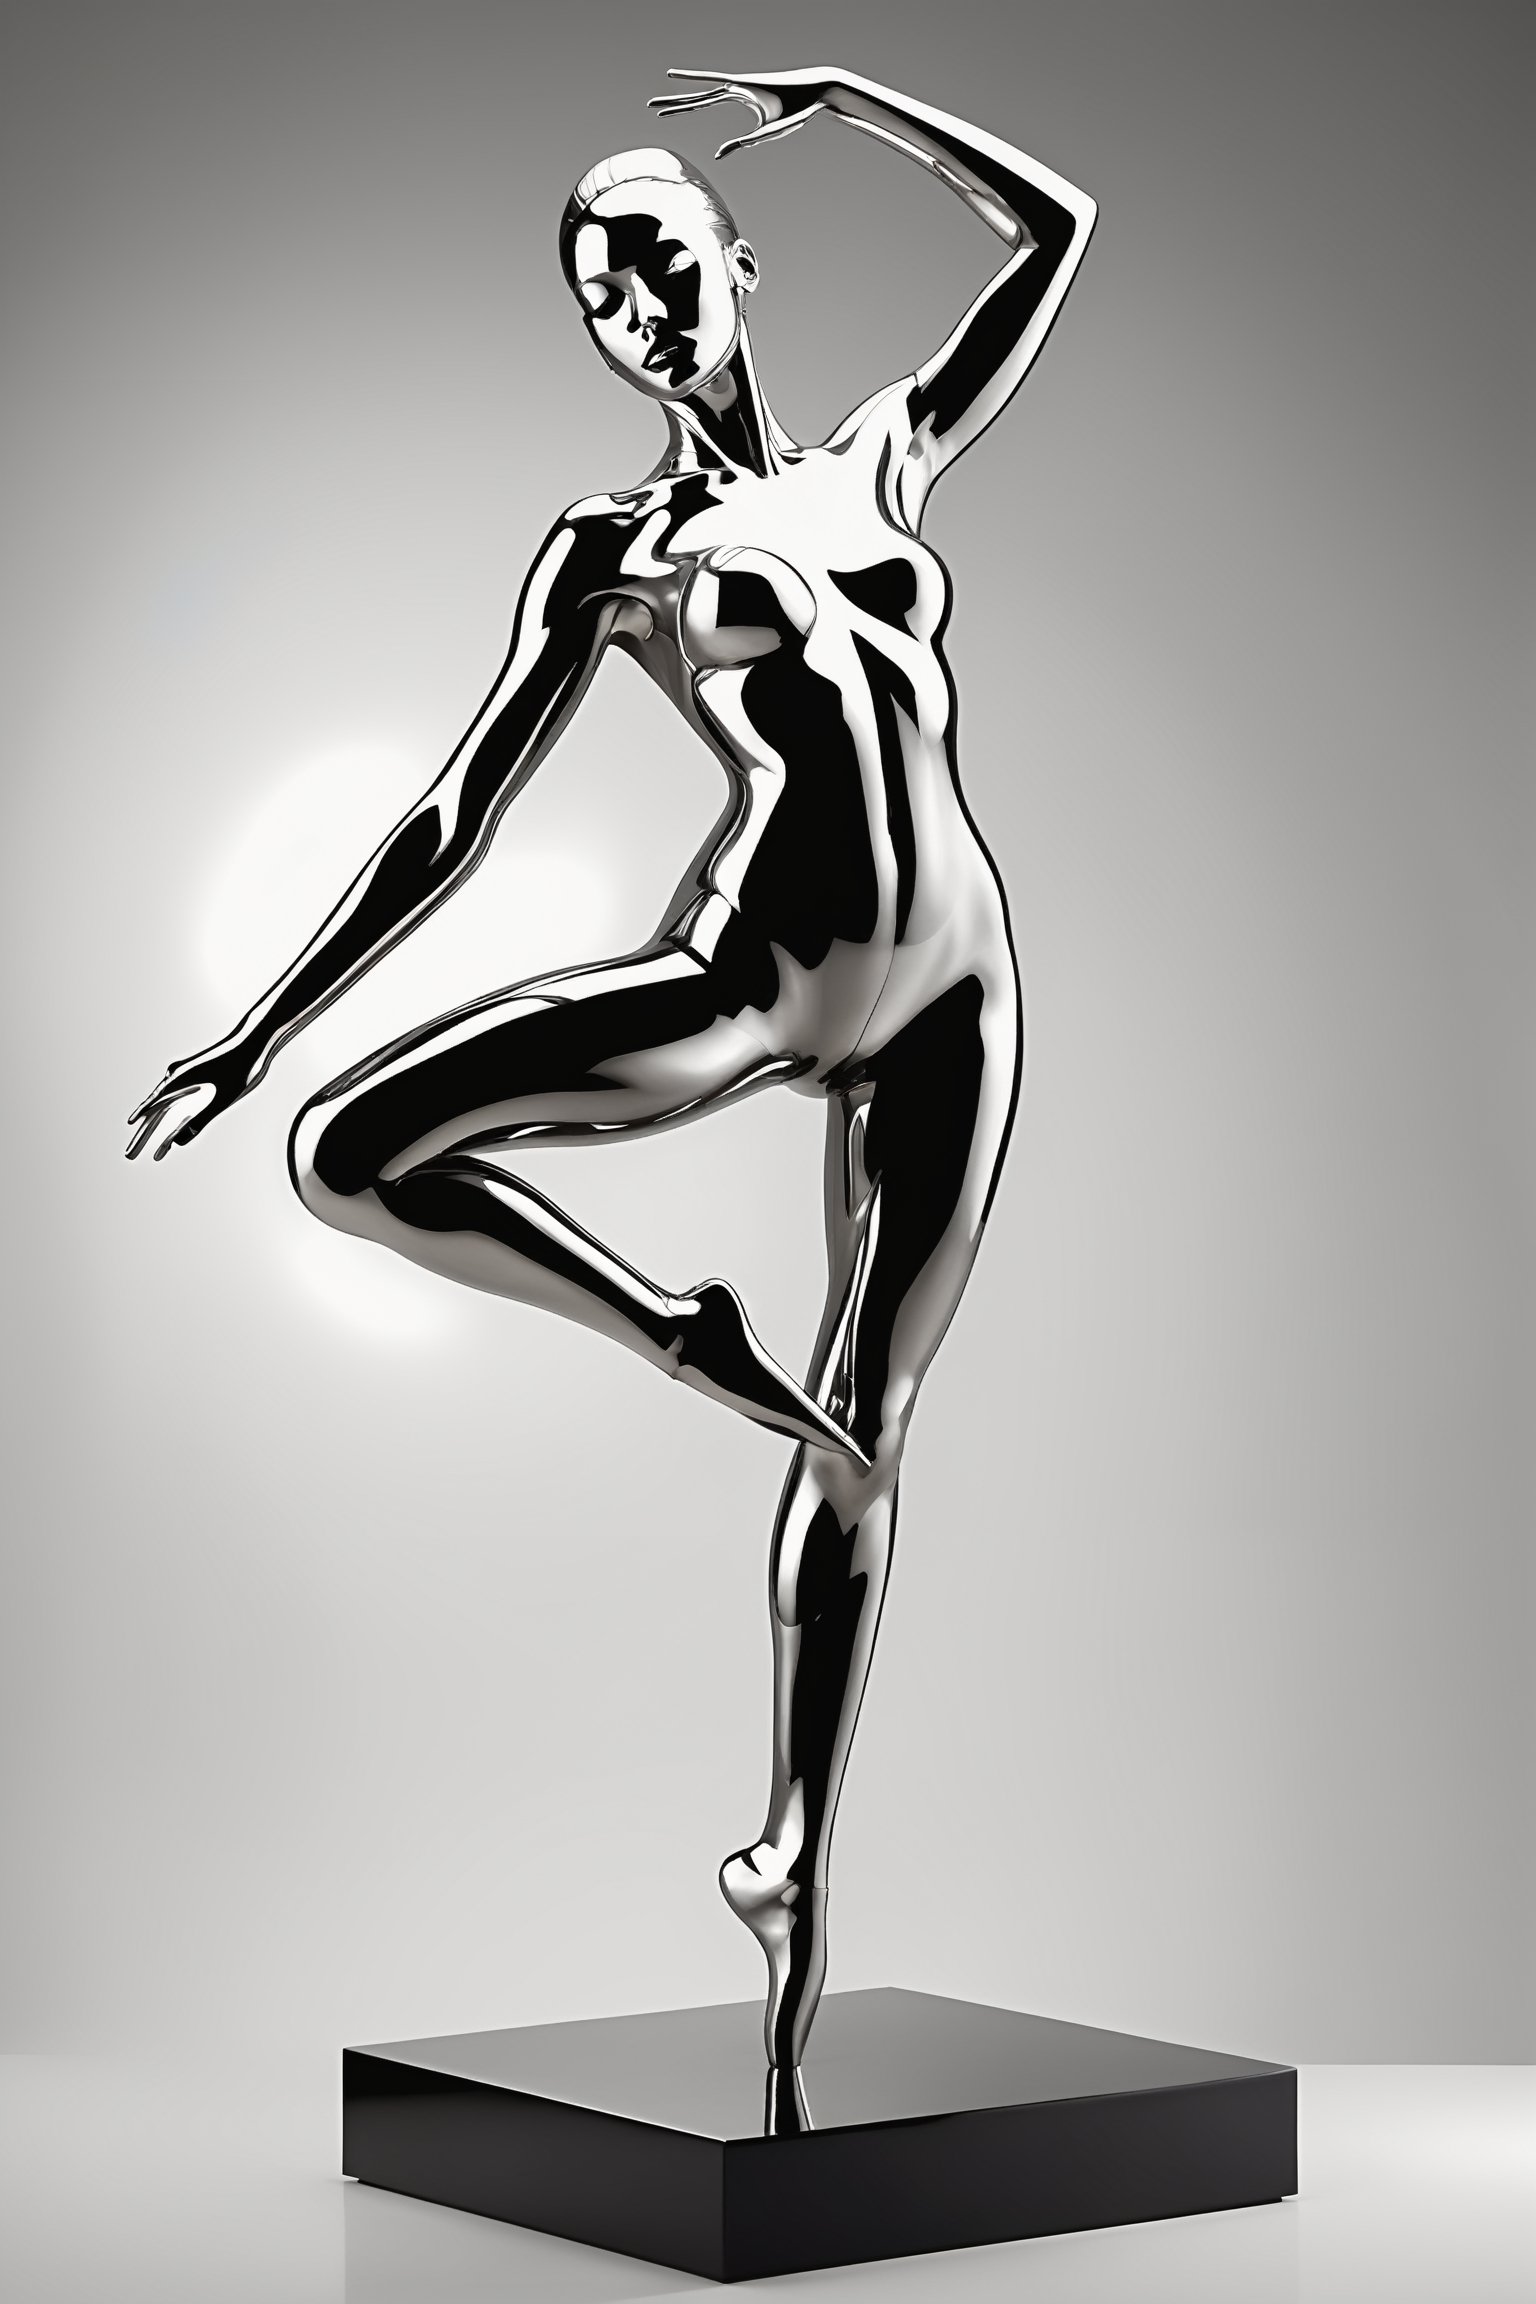 Abstract full body sculpture of a dancer, contorted limbs defying human form, capturing the energy and flow of movement, contemporary art style, bold gestures, polished metal surfaces